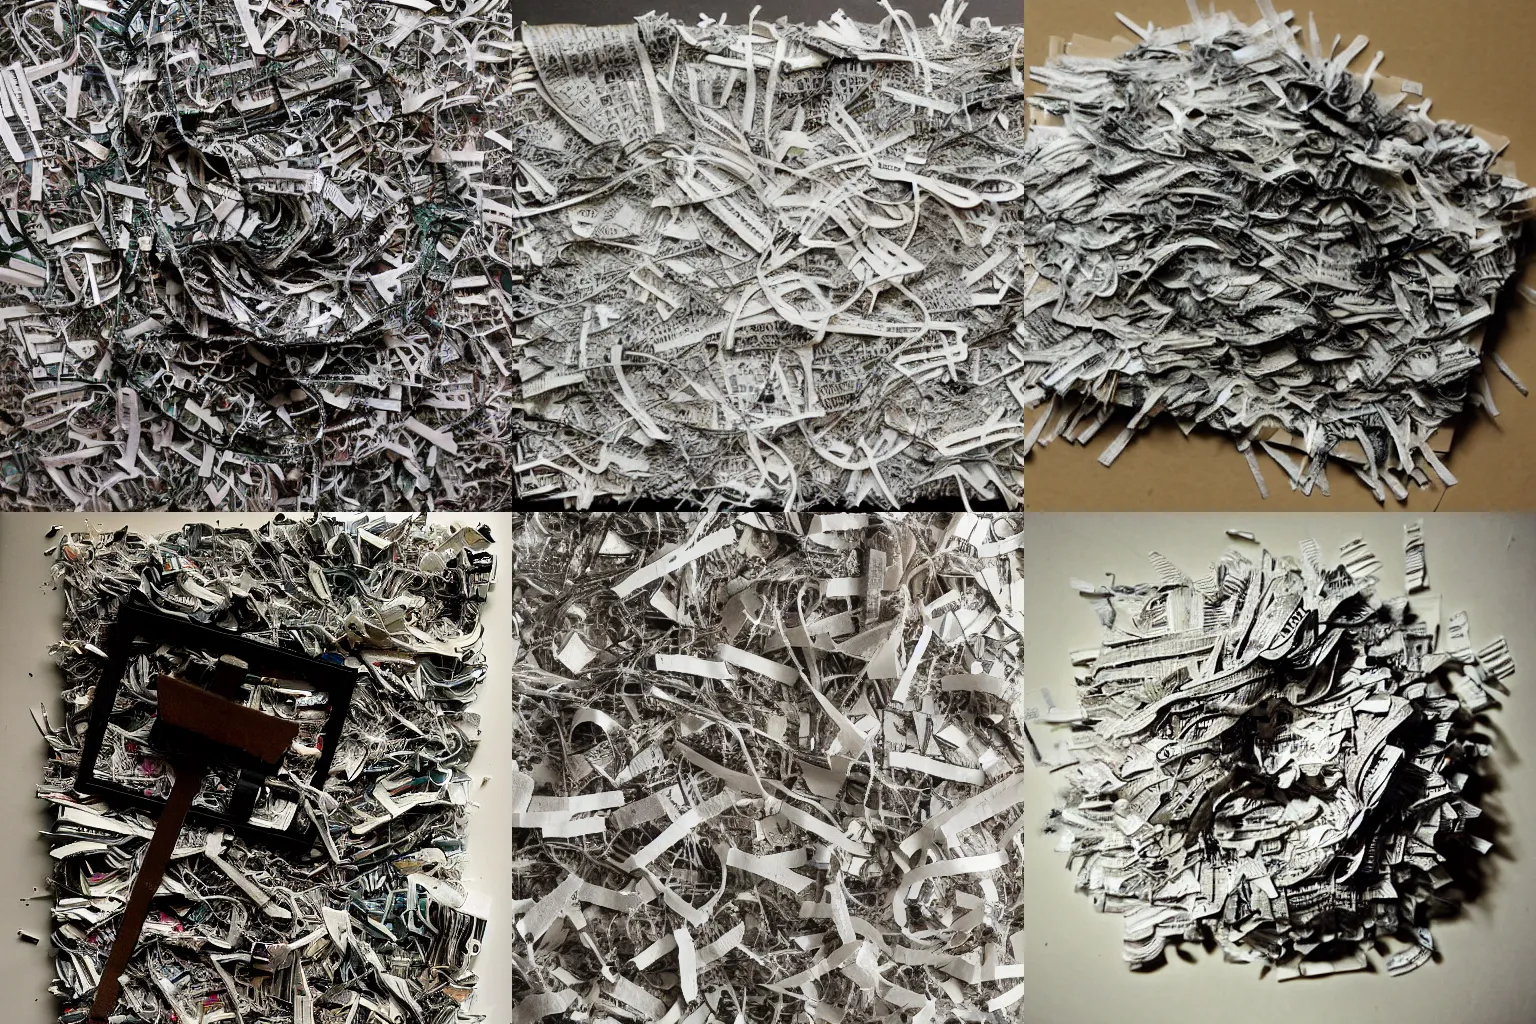 Prompt: A photograph of a present filled with shredded newspaper, low light, sad, DeviantArt